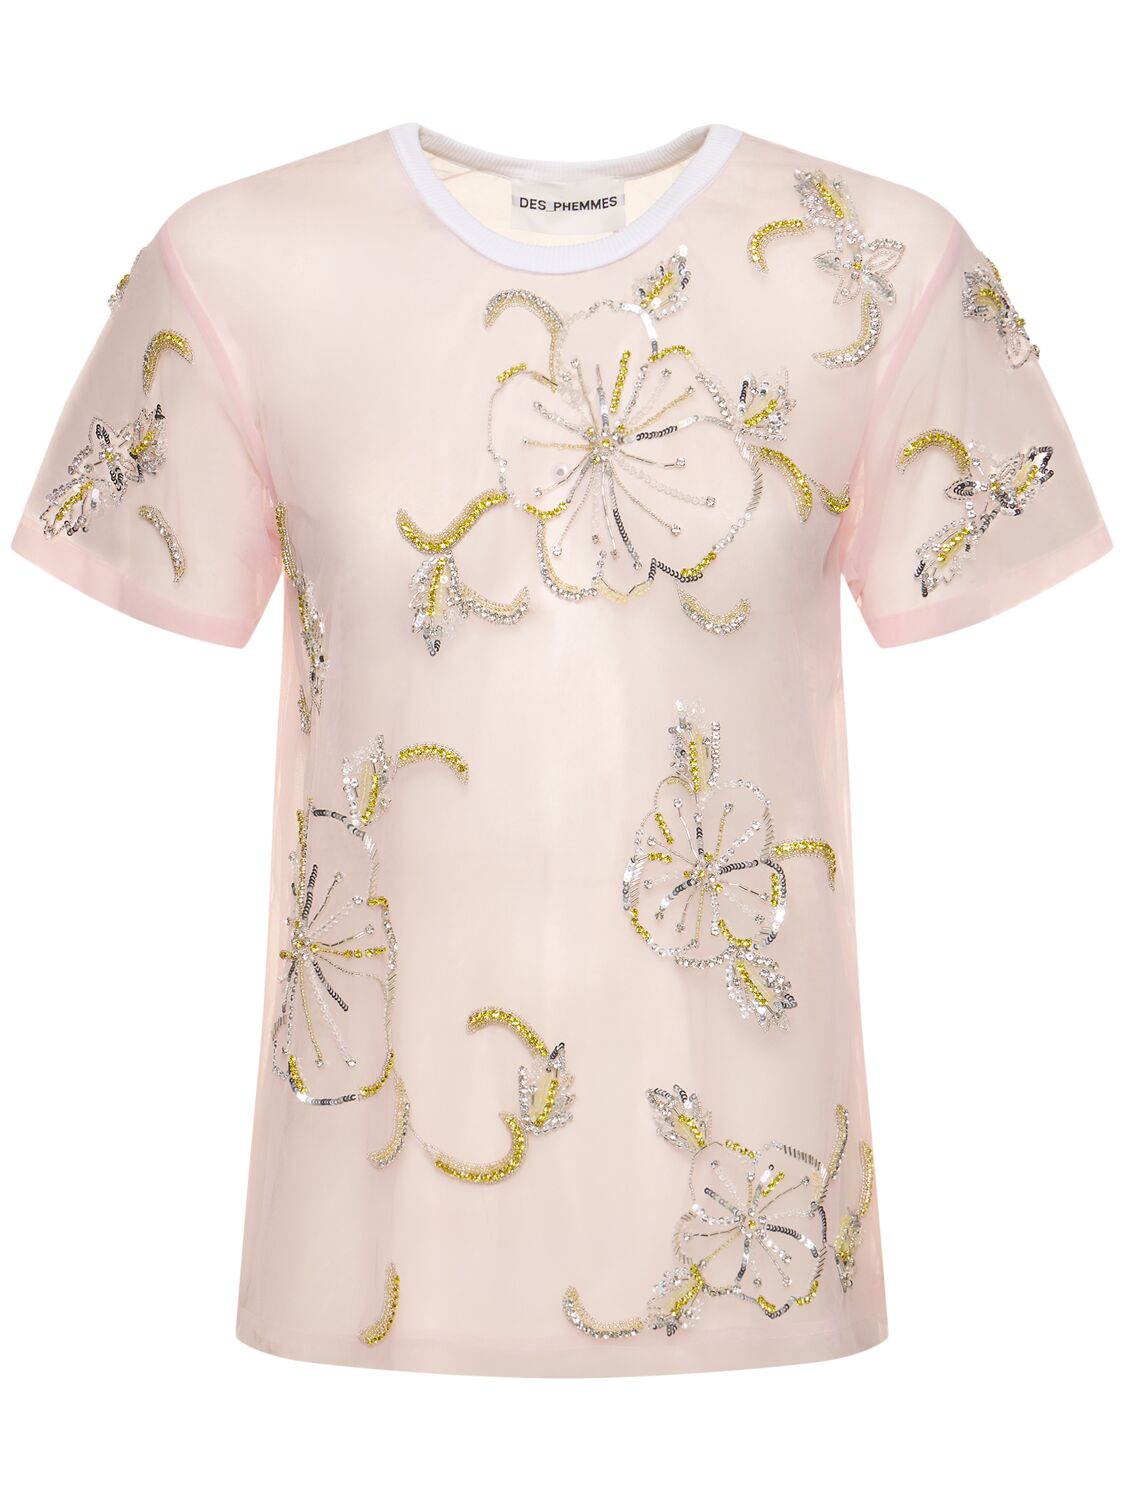 DES PHEMMES Hibiscus Embroidered Tulle Top